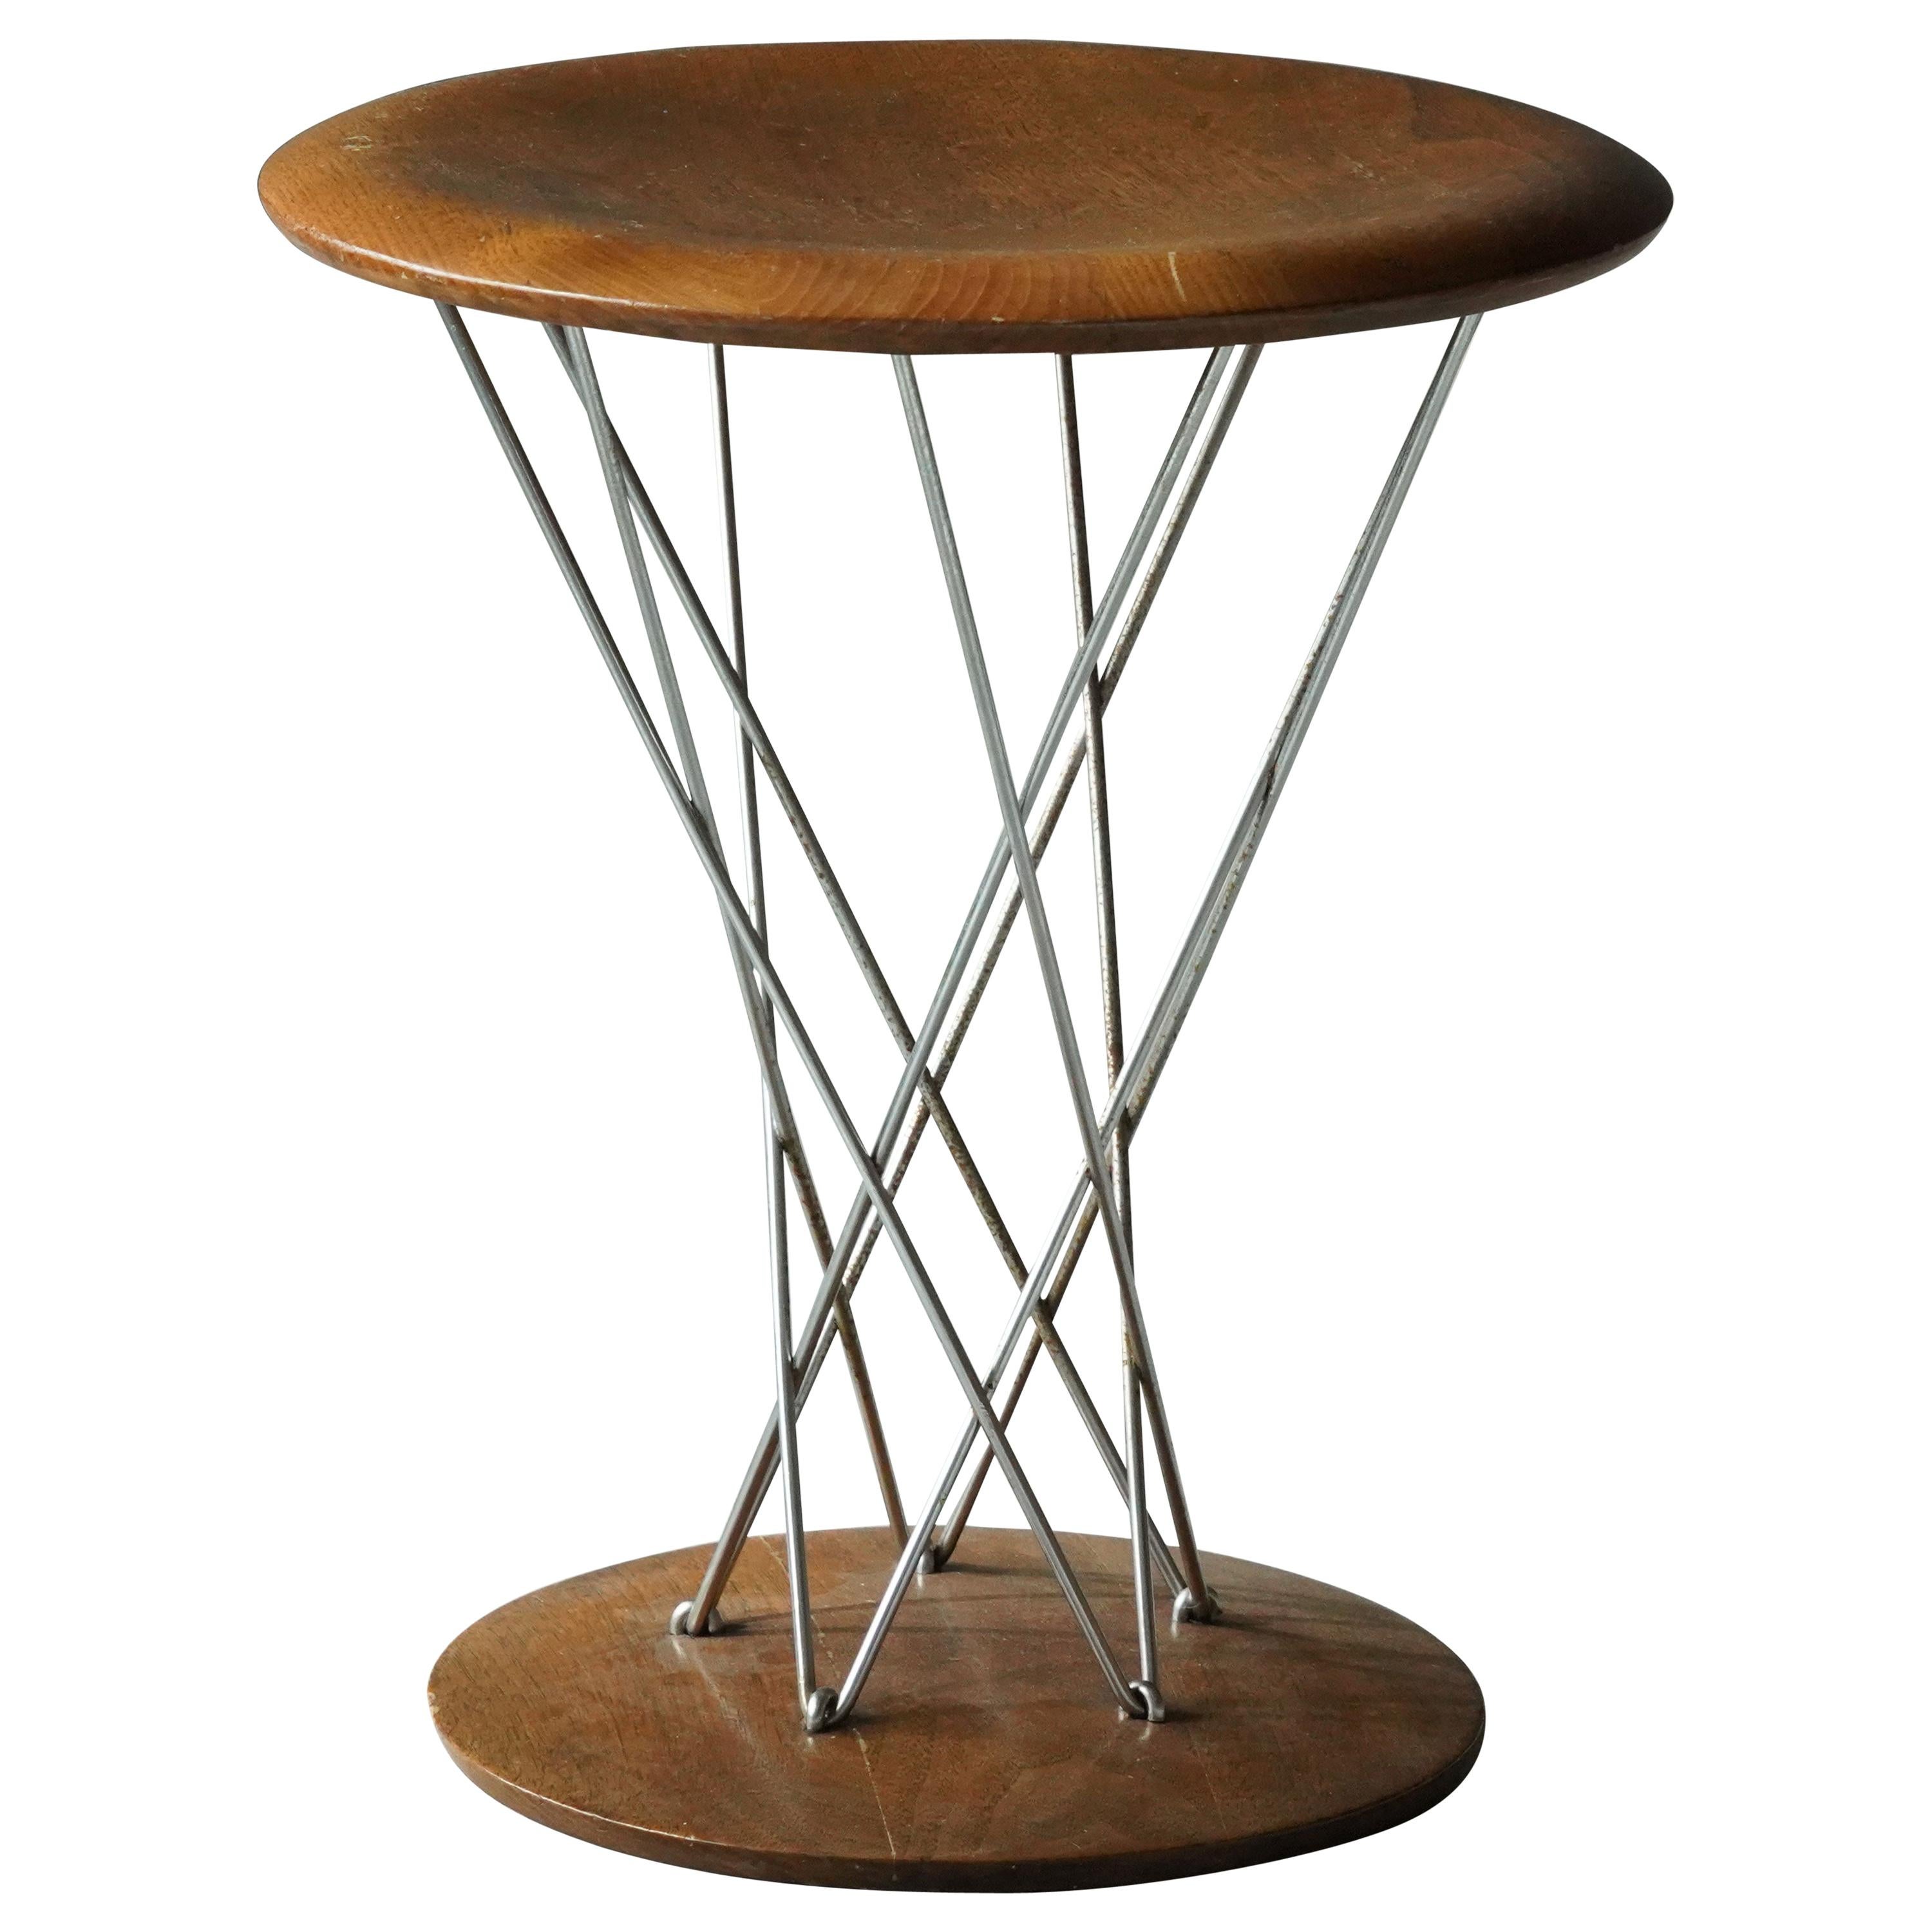 Isamu Noguchi, Early "Cyclone" Stool, Maple, Chrome-Plated Steel, Knoll, 1950s